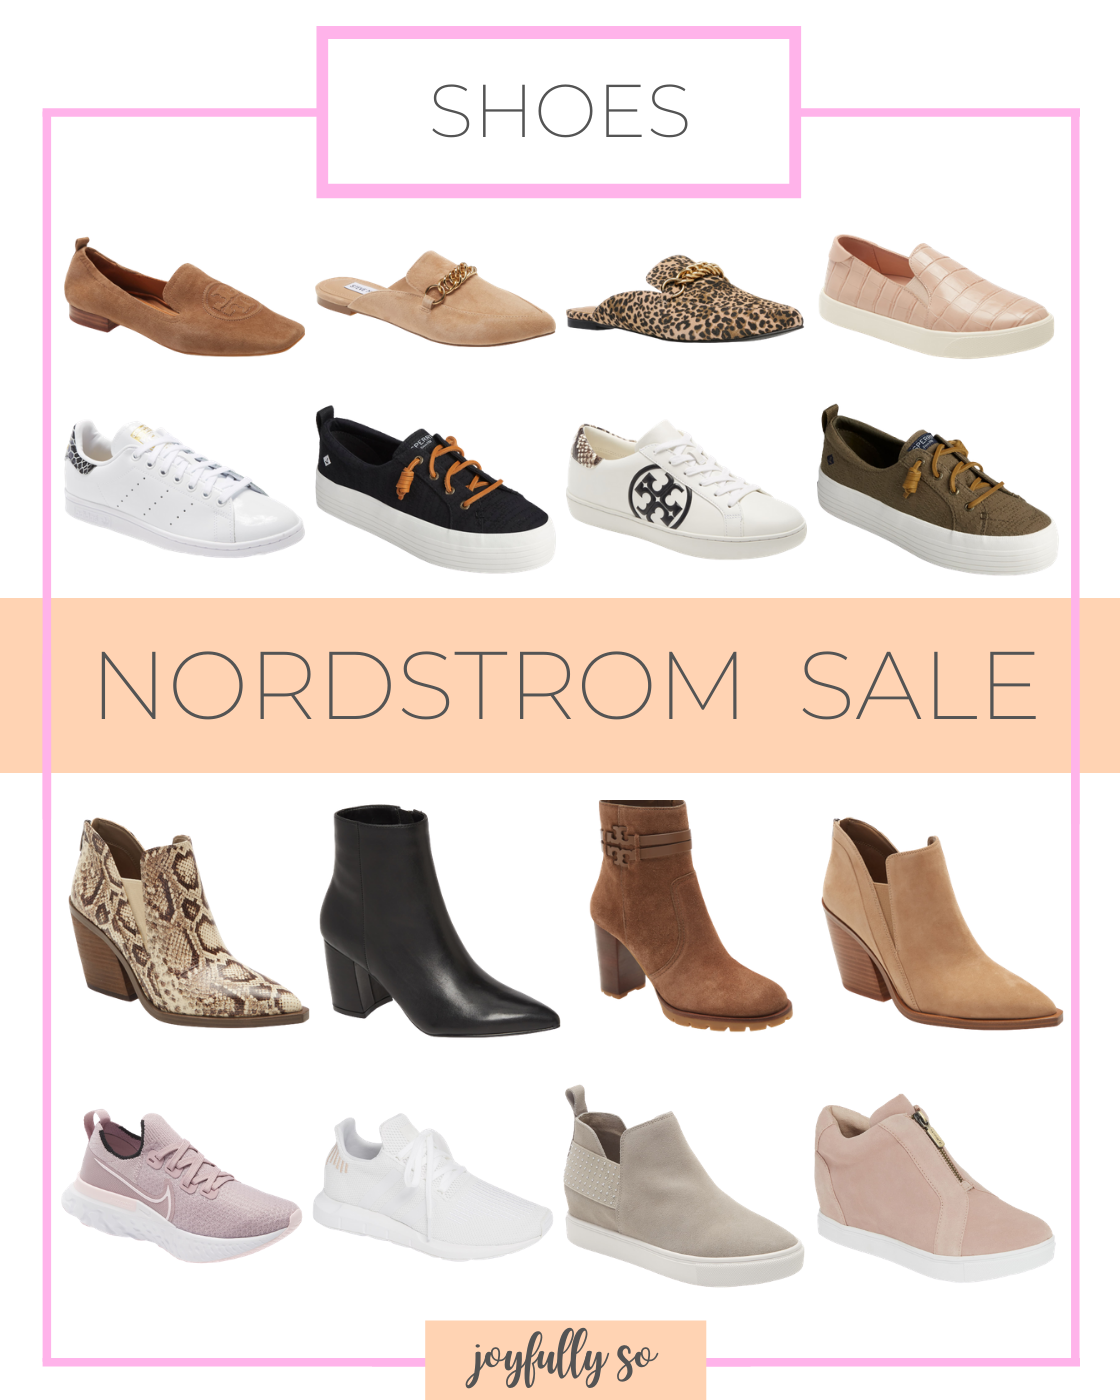 Favorite shoe finds in the Nordstrom Sale! To celebrate the NSale and the new website layout on Joyfully So, there is a Tory Burch giveaway! Let’s get to the Women’s Nordstrom Anniversary Sale 2020 Shopping Guide!